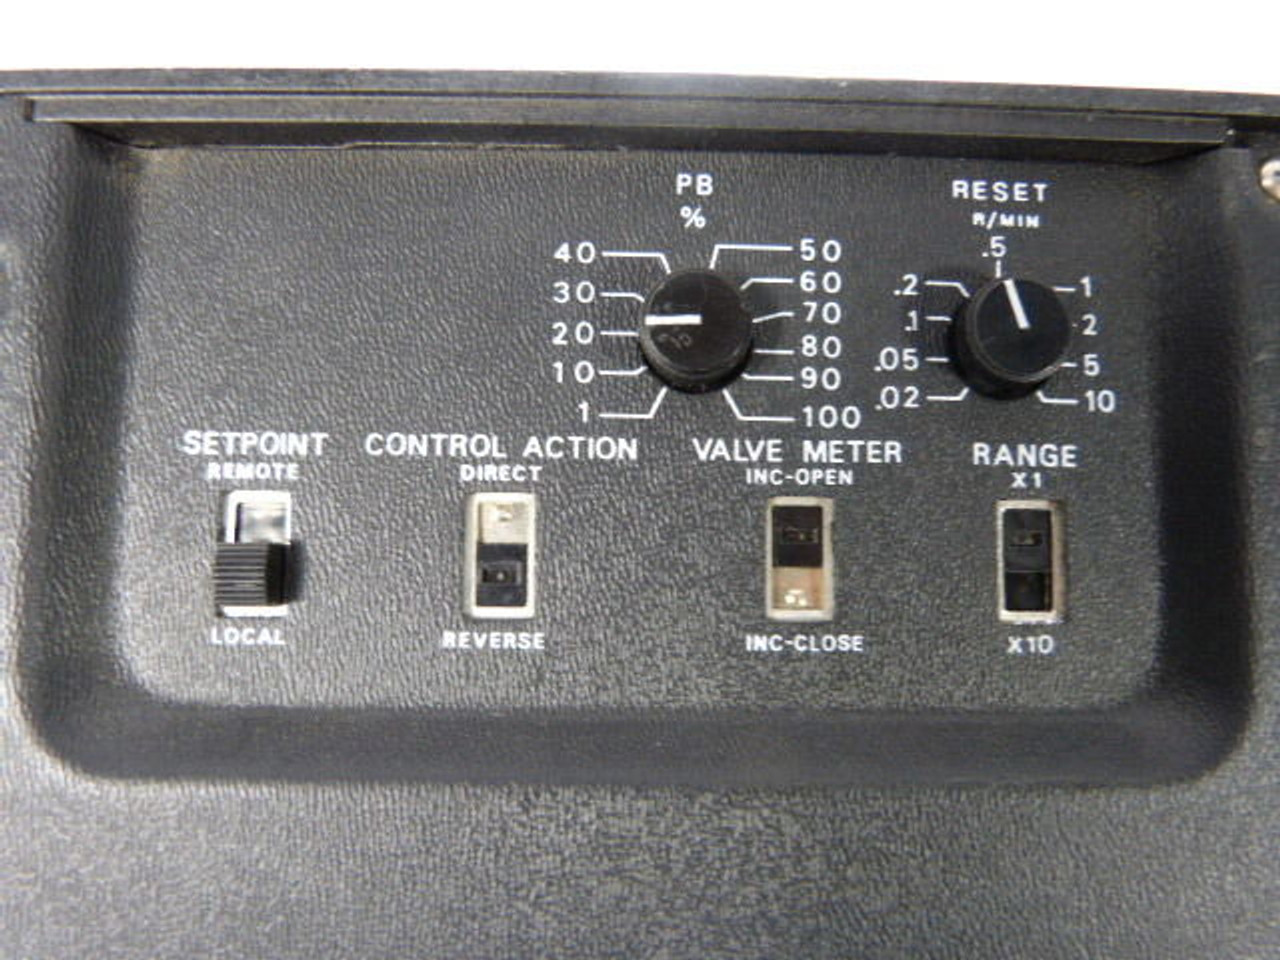 Fisher Controls TL101 Process Controller Range 0 - 75 USED